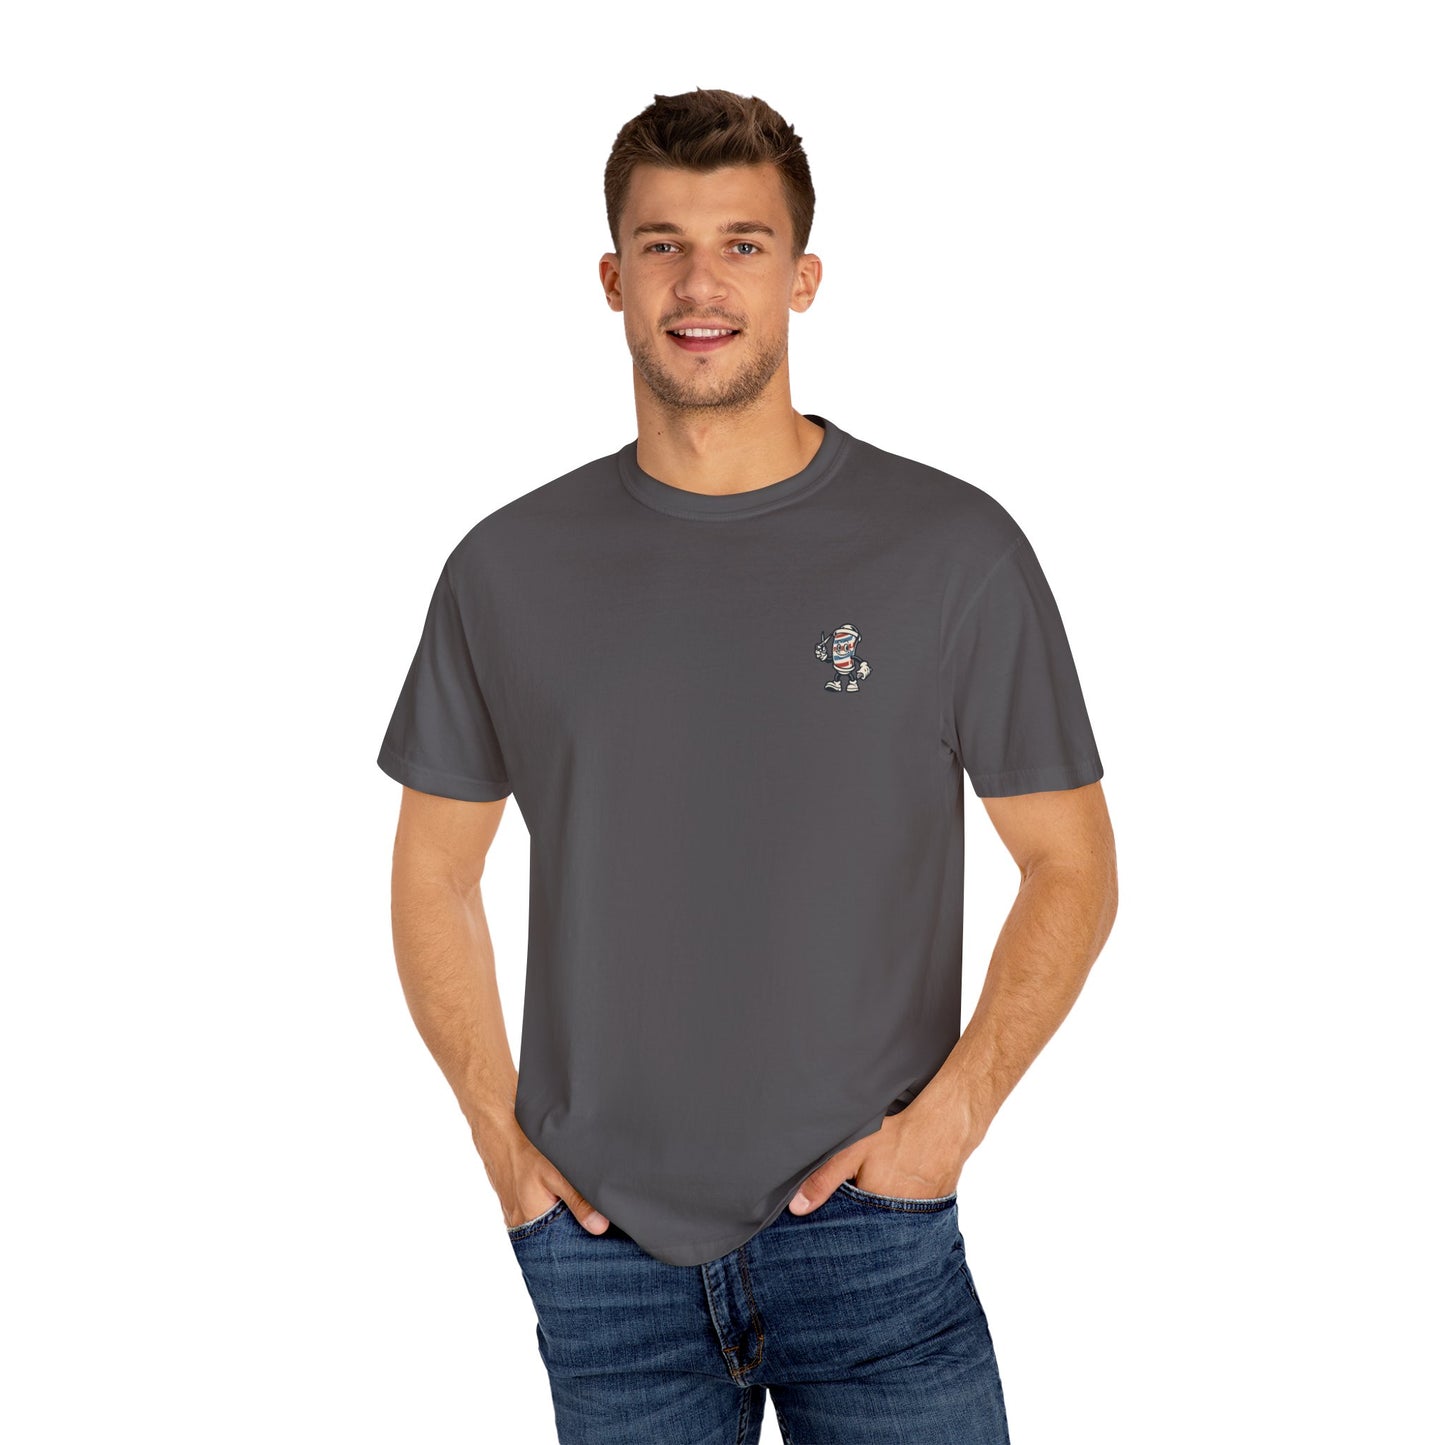 Noble Running with Scissors T-shirt